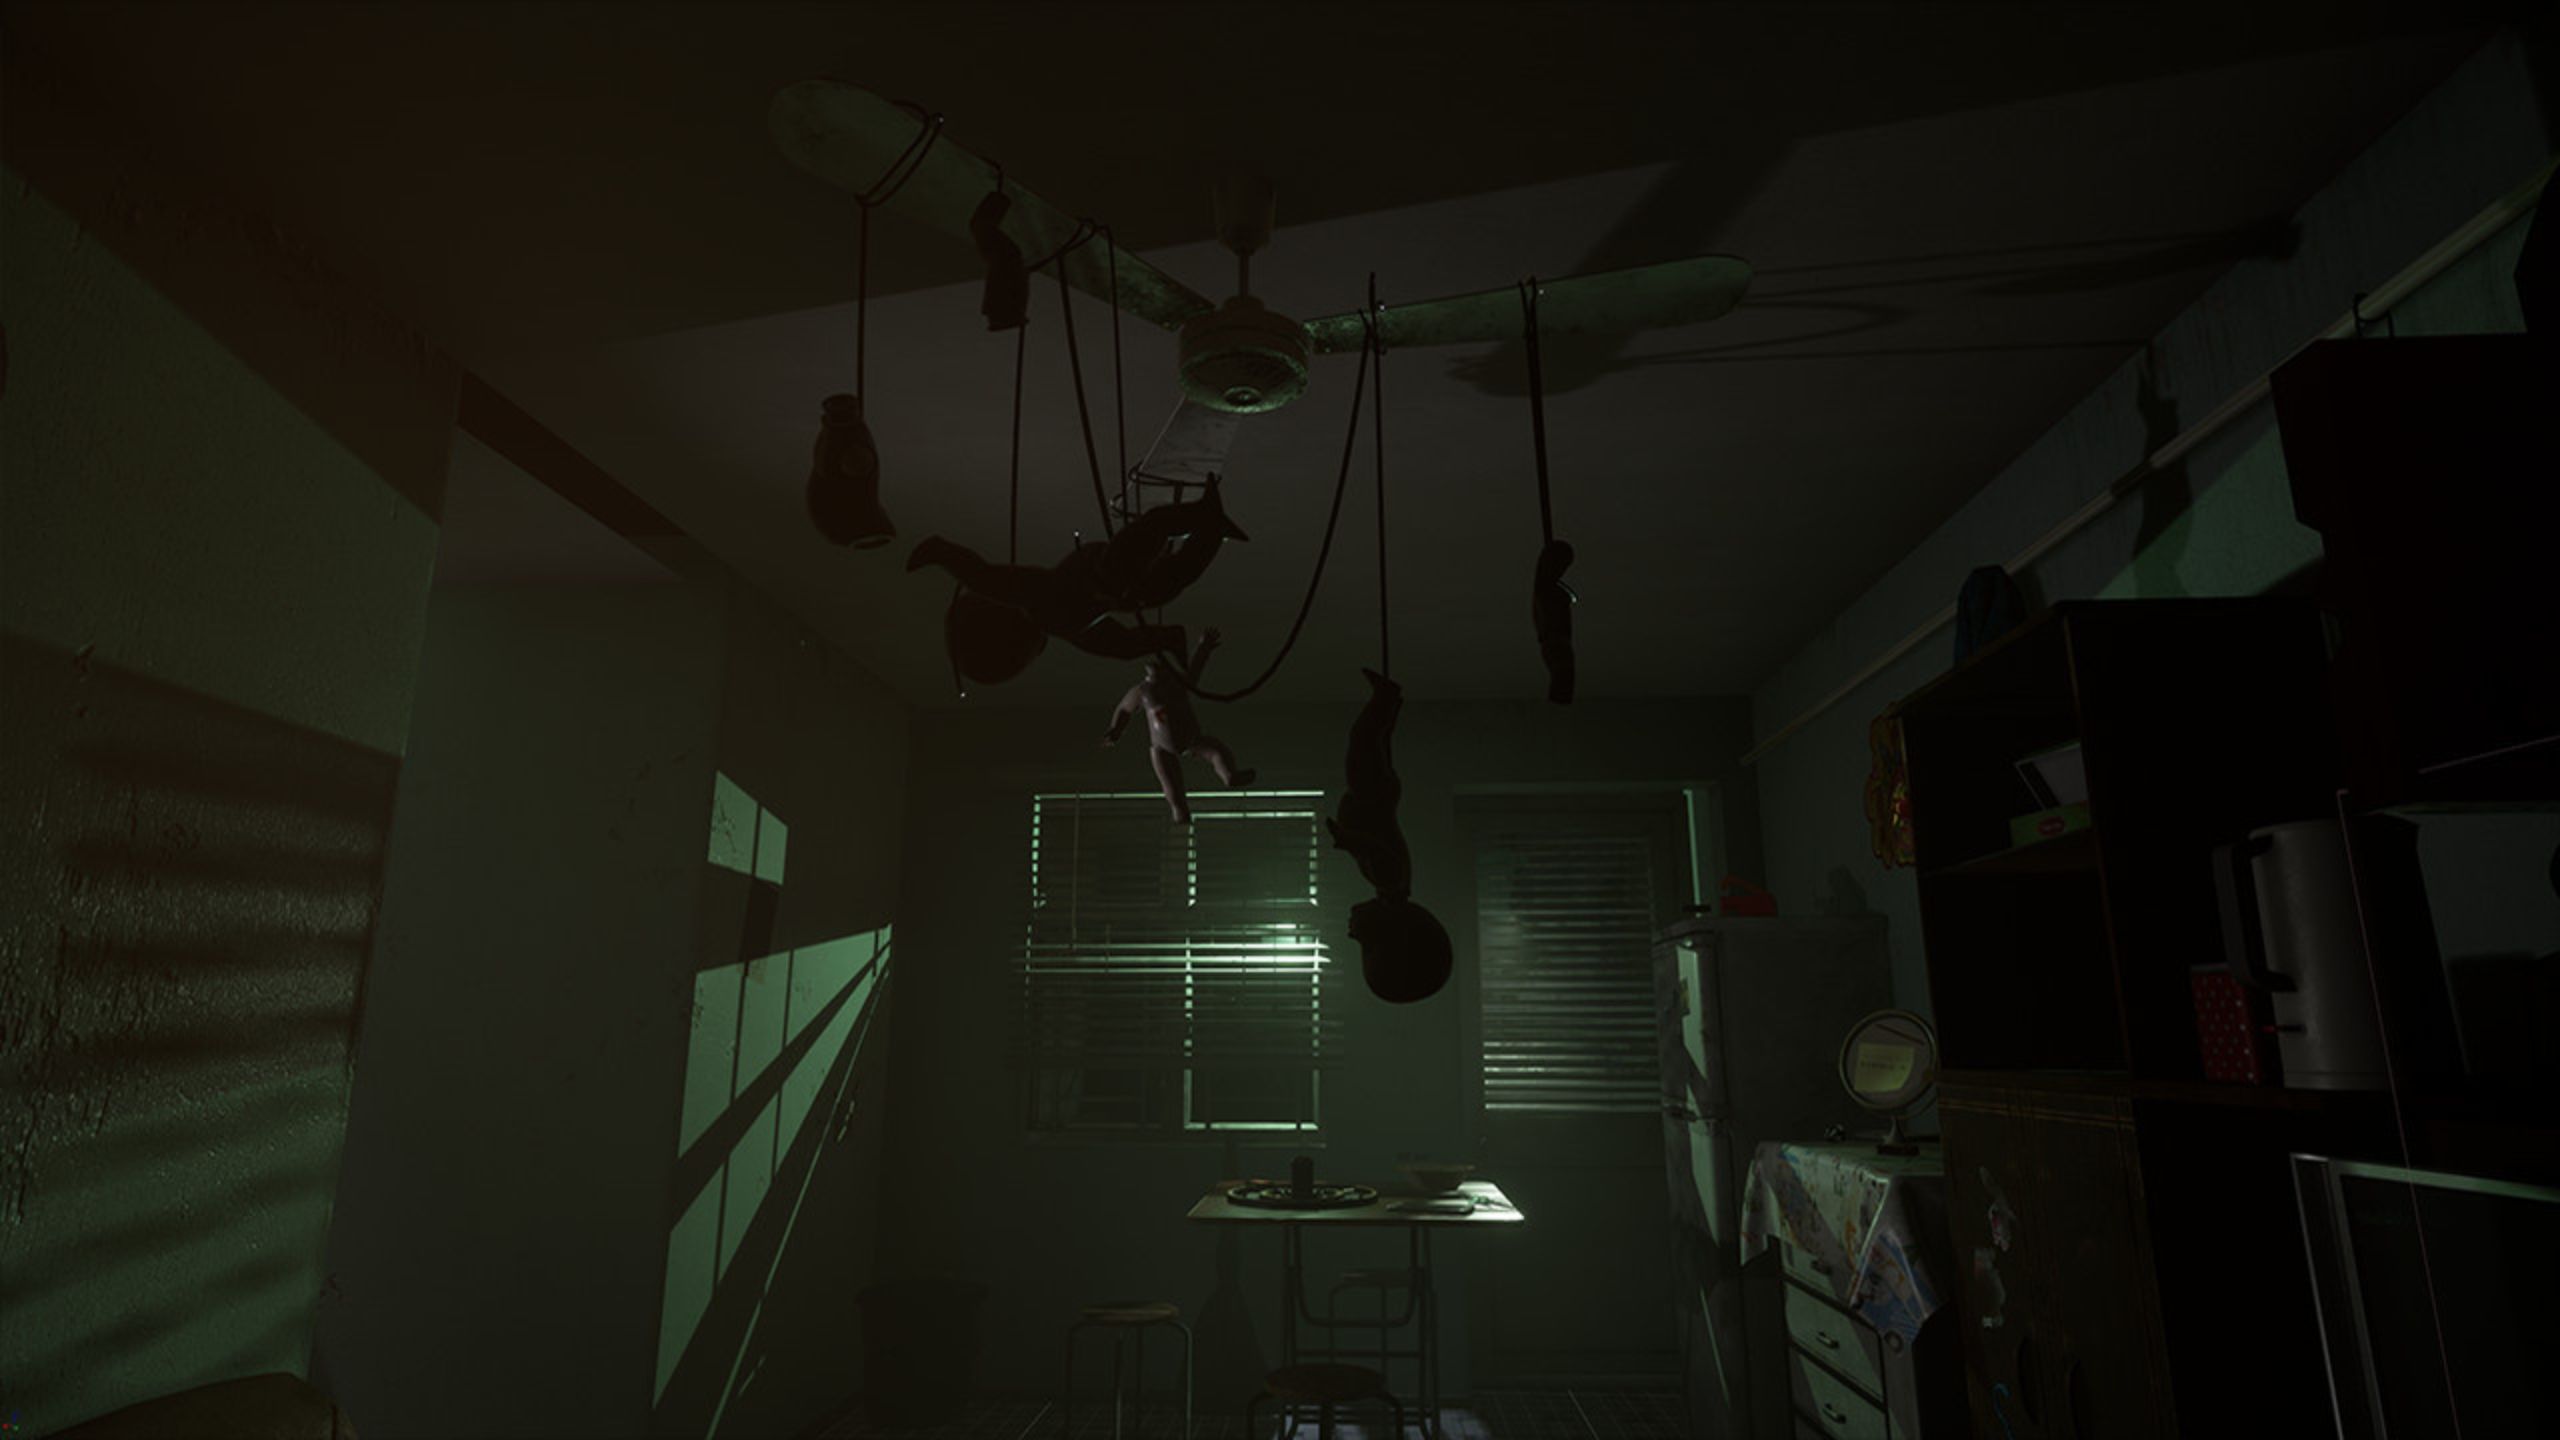 A shadowy room with dolls hanging from a fan.